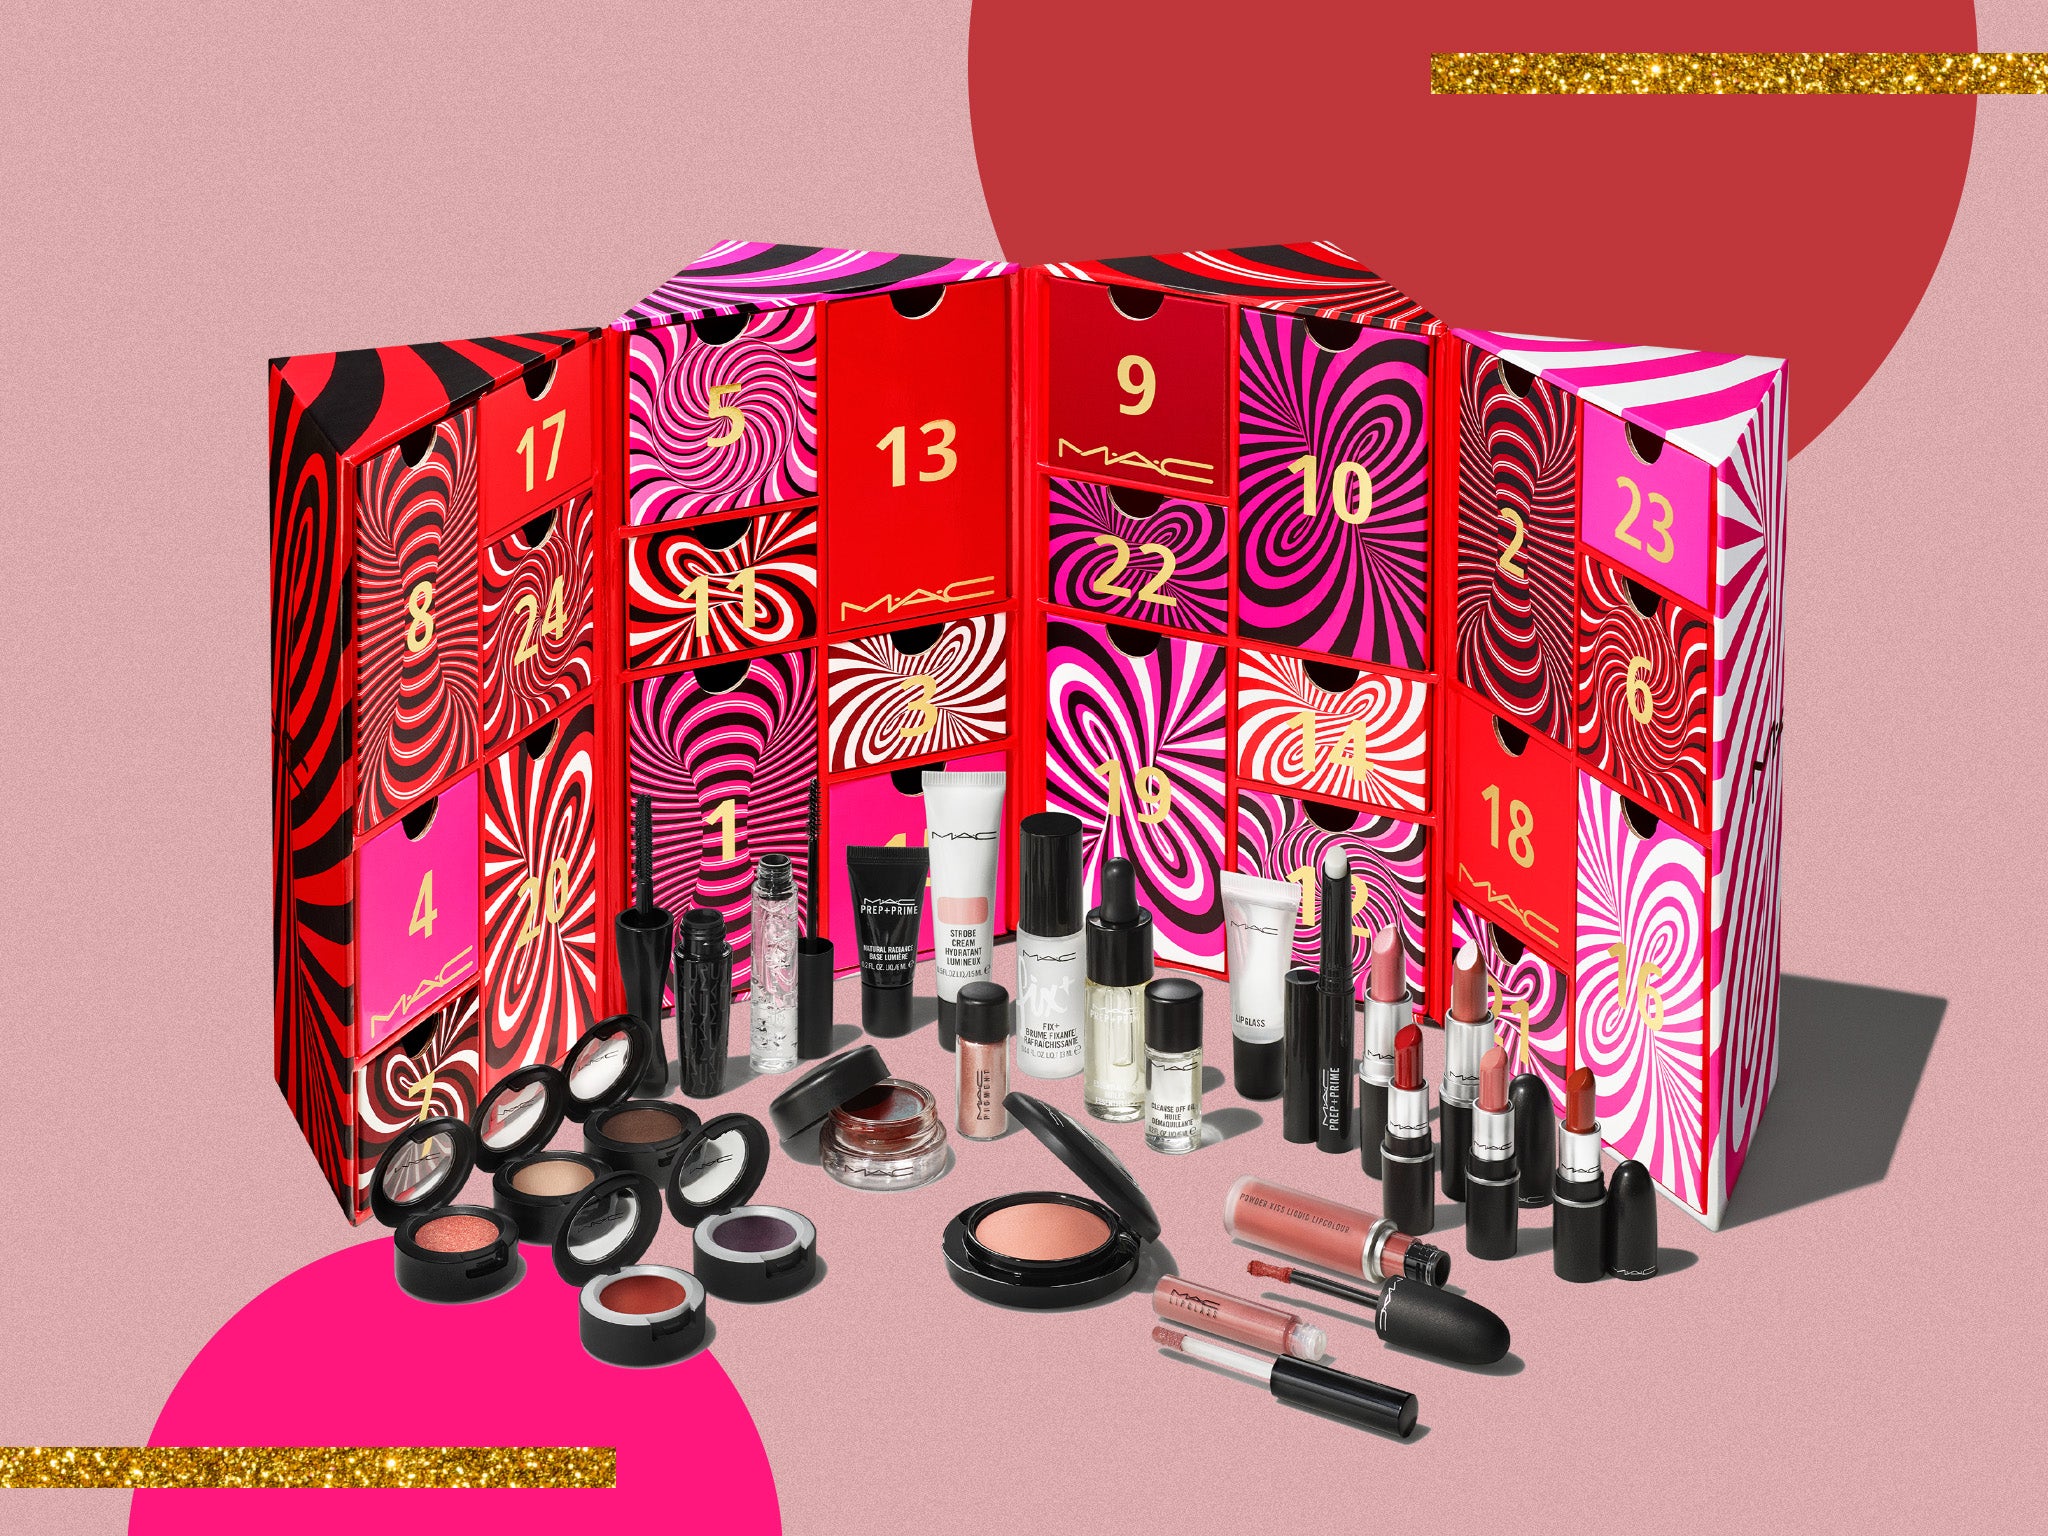 Mac beauty advent calendar review: A worthy collection of cult